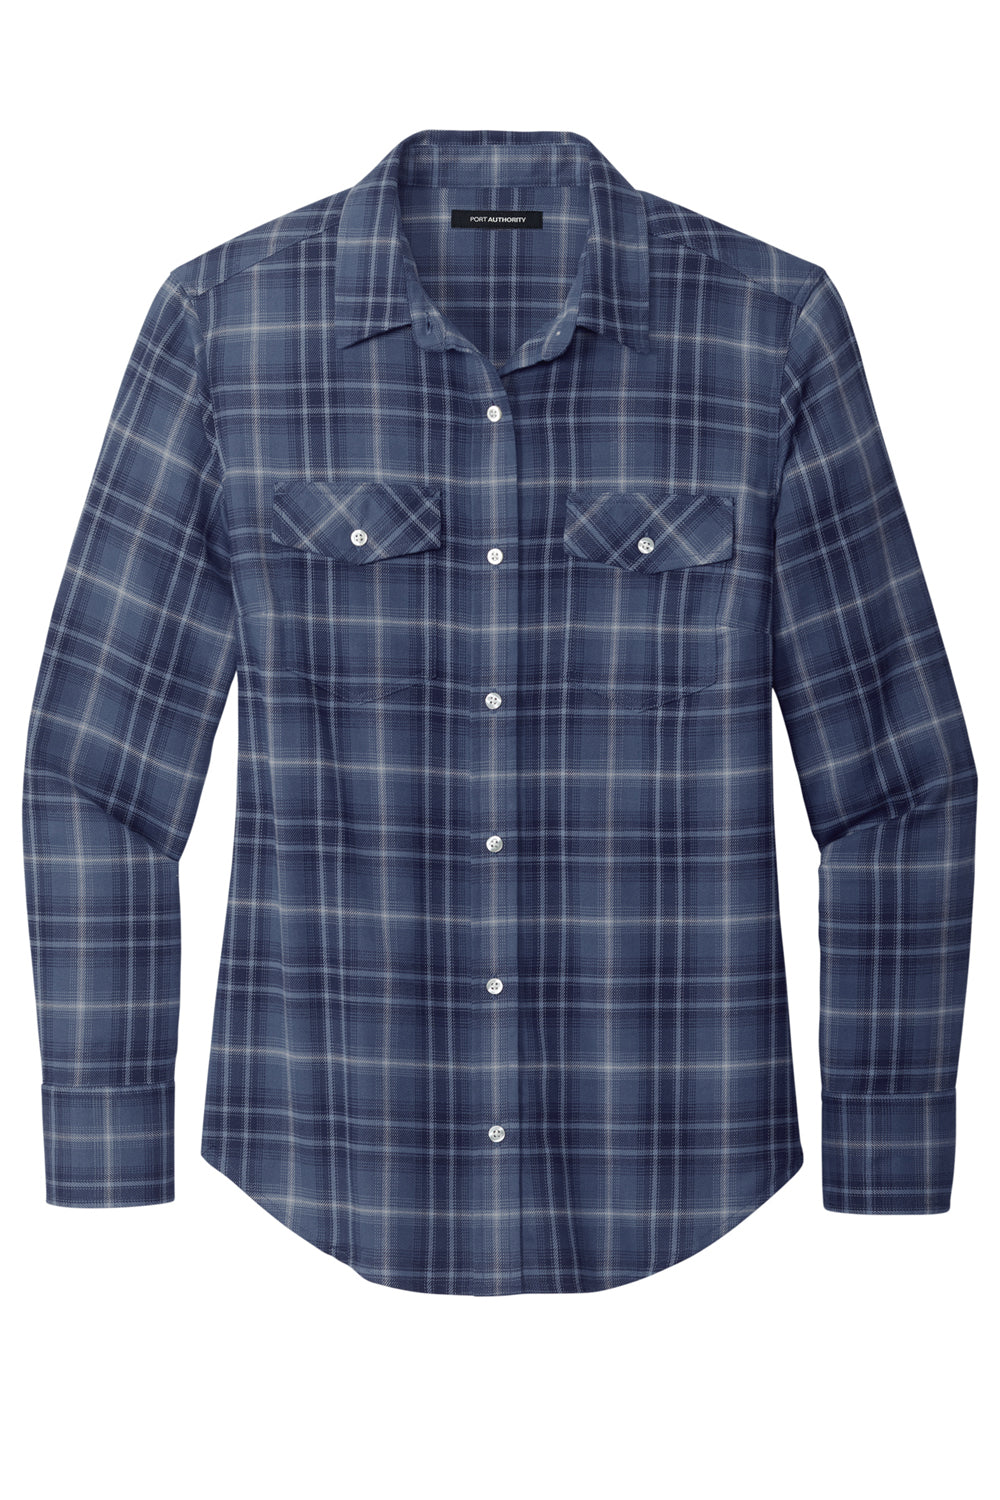 Port Authority LW672 Ombre Plaid Long Sleeve Button Down Shirt True Navy Blue Flat Front